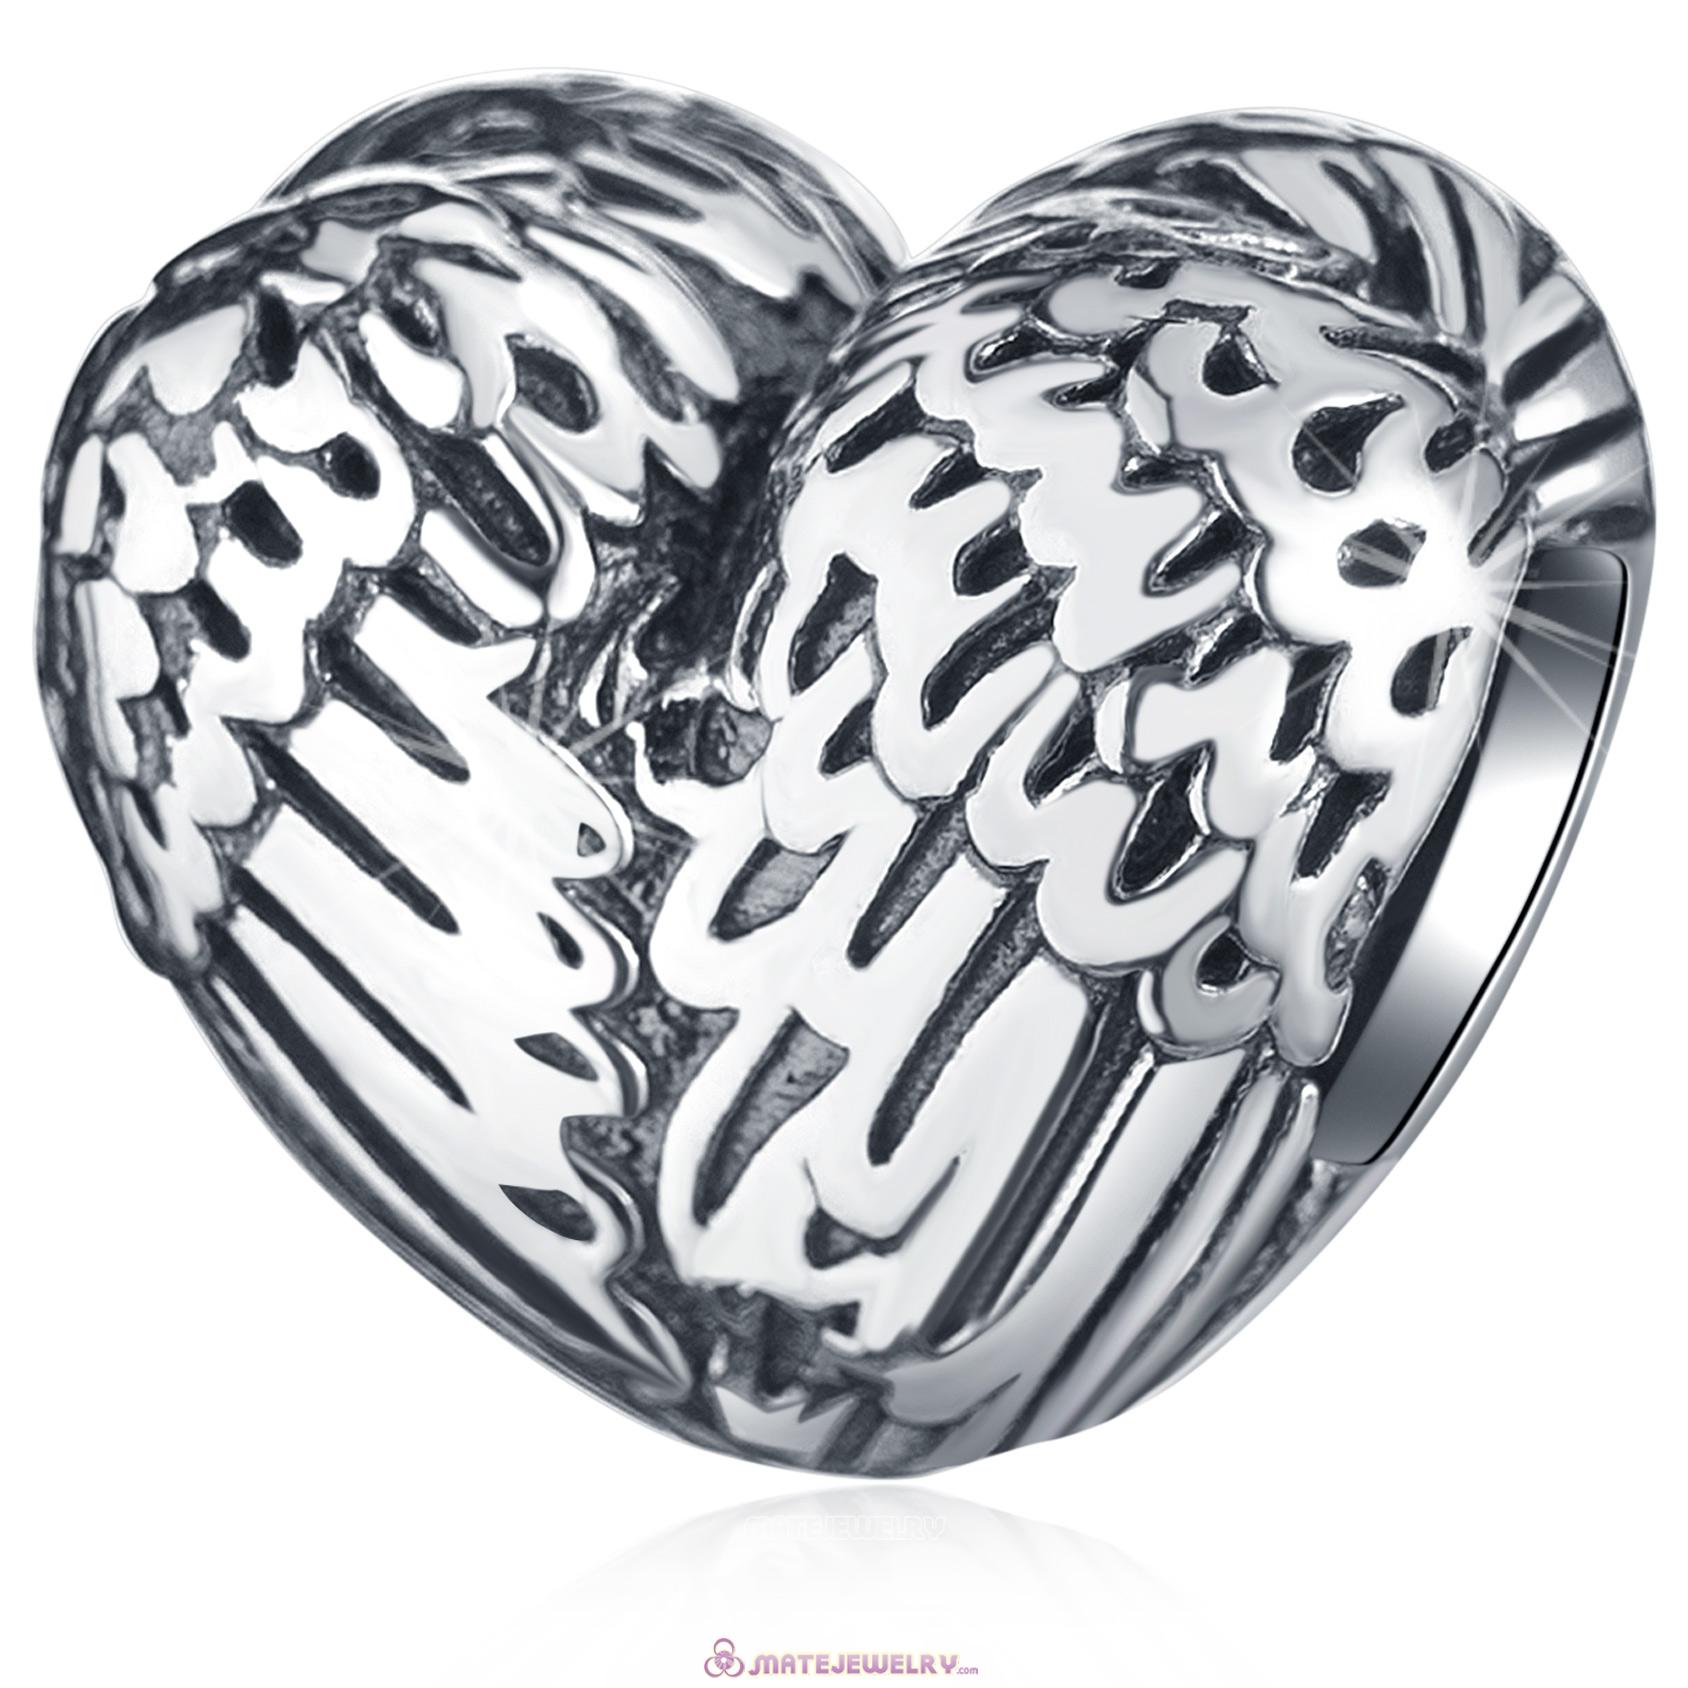 Angelic Feathers Heart 925 Sterling Silver Charm Bead